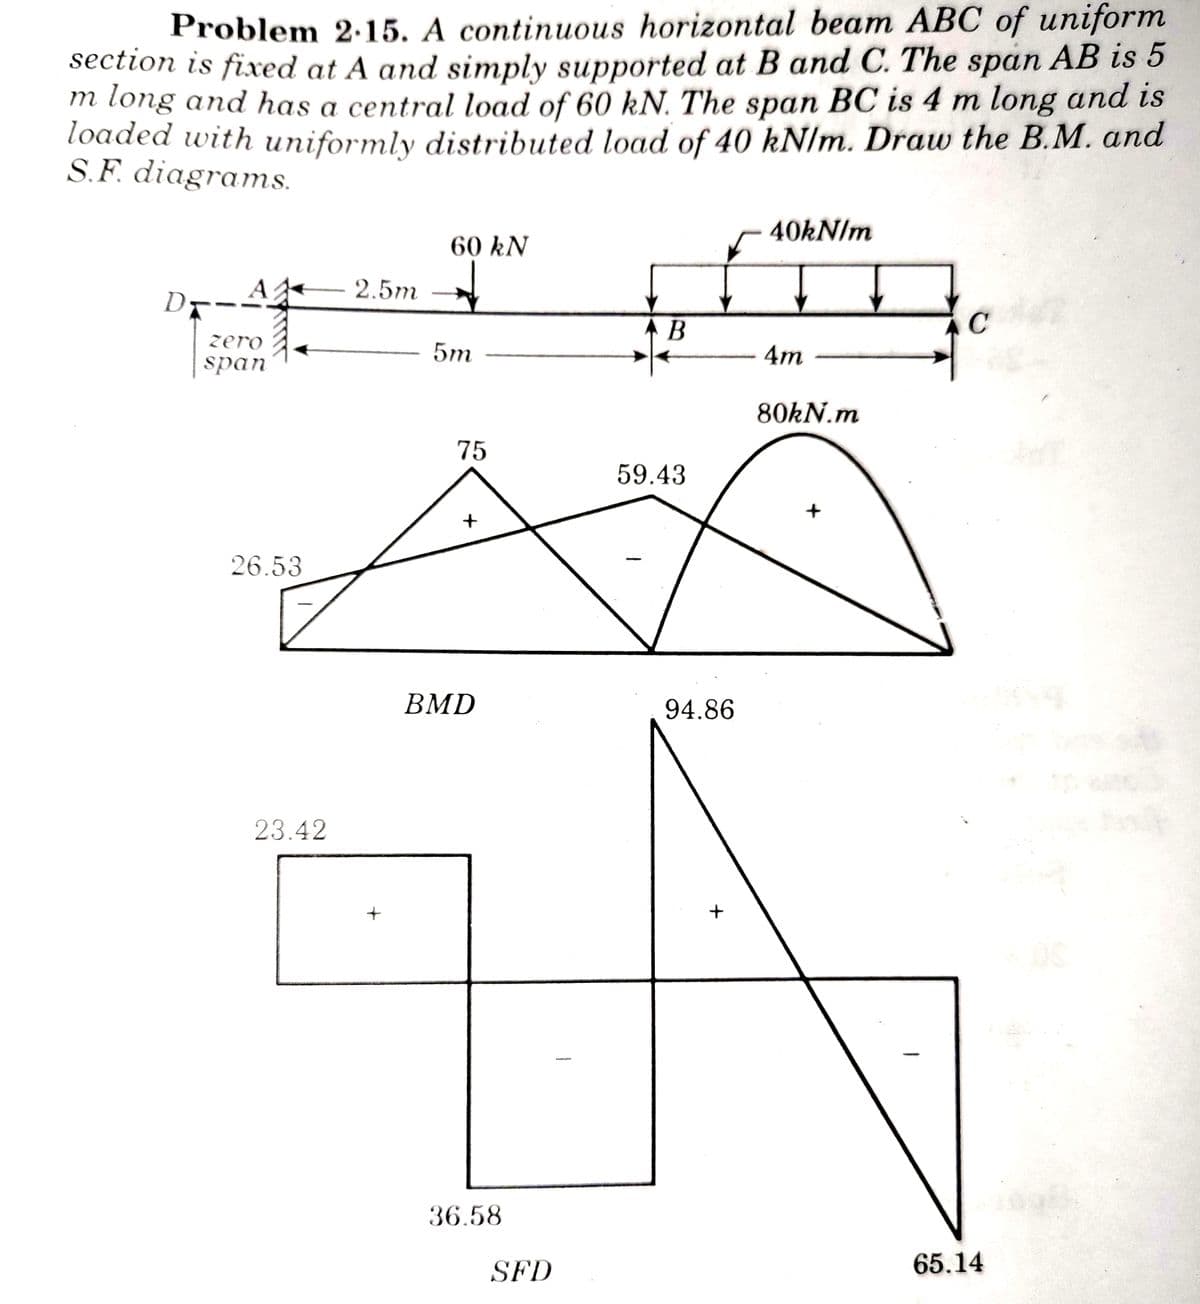 Problem 2·15. A continuous horizontal beam ABC of uniform
section is fixed at A and simply supported at B and C. The span AB is 5
m long and has a central load of 60 kN. The span BC is 4 m long and is
loaded with uniformly distributed load of 40 kN/m. Draw the B.M. and
S.F. diagrams.
40KN/m
60 kN
2.5m
Dy
zero
5m
4m
span
80KN.m
75
59.43
26.53
BMD
94.86
23.42
36.58
SFD
65.14
+
